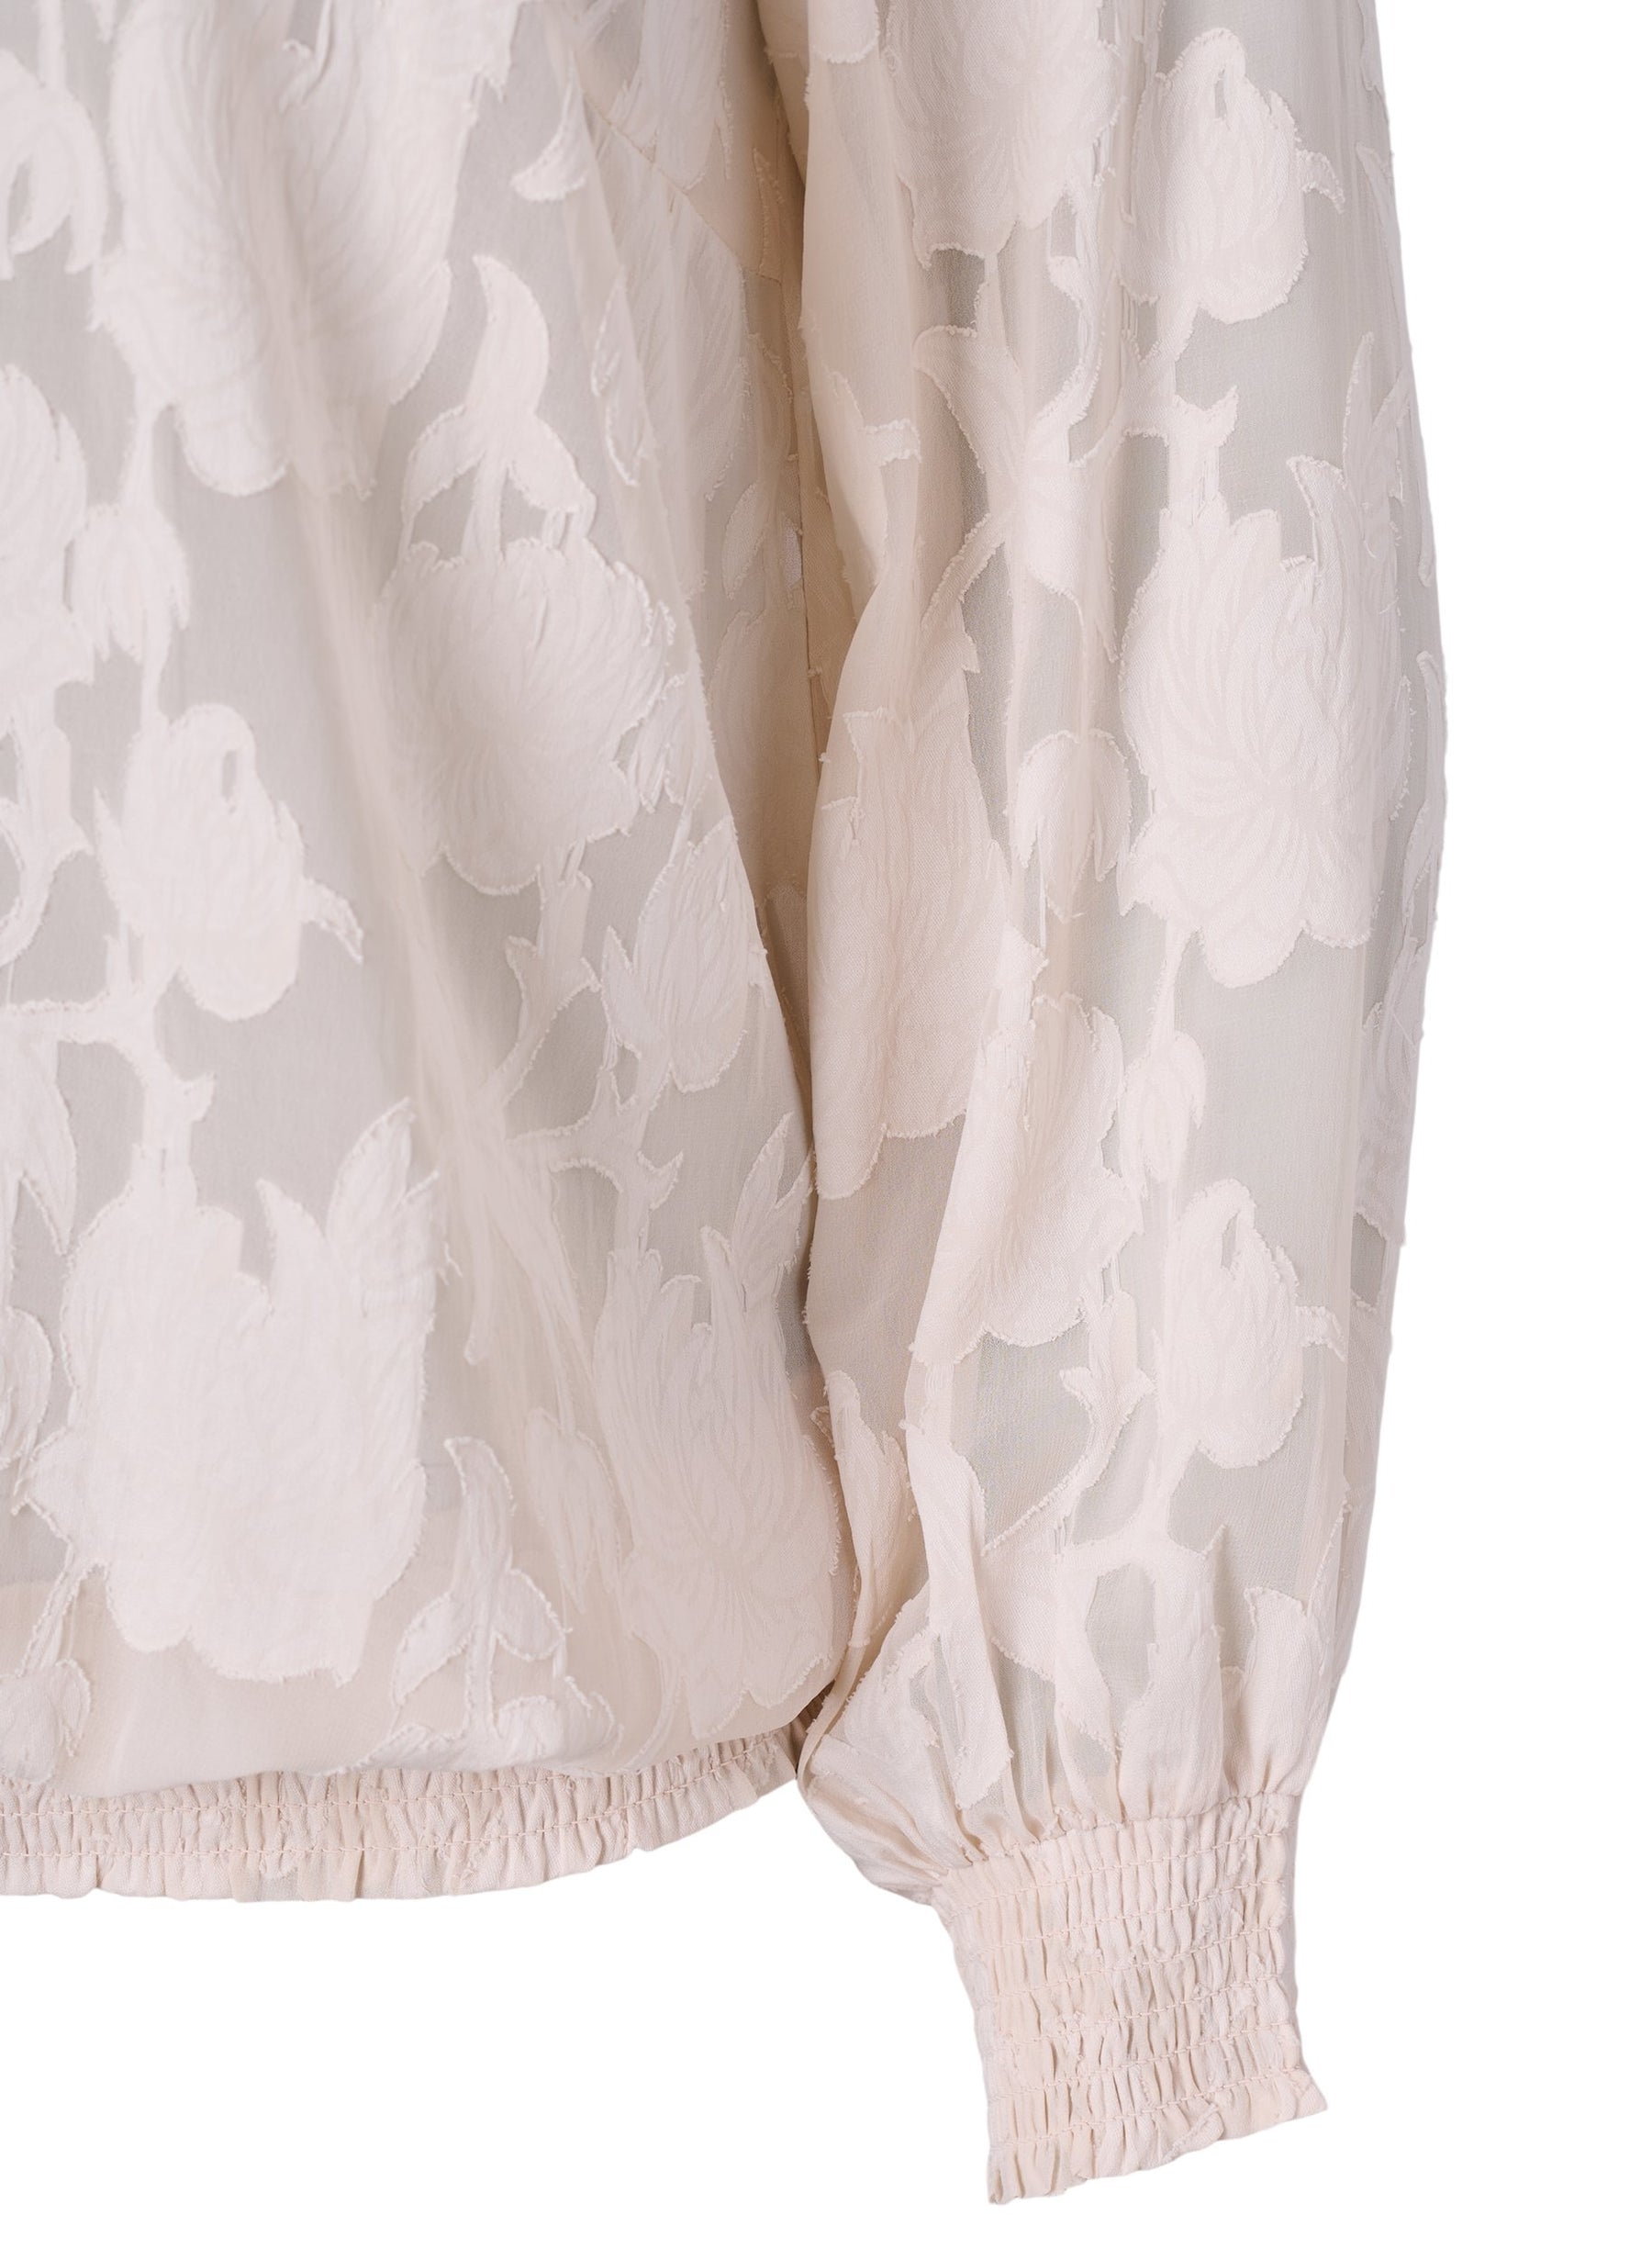 Zizzi Floral Smocked Blouse in Off White